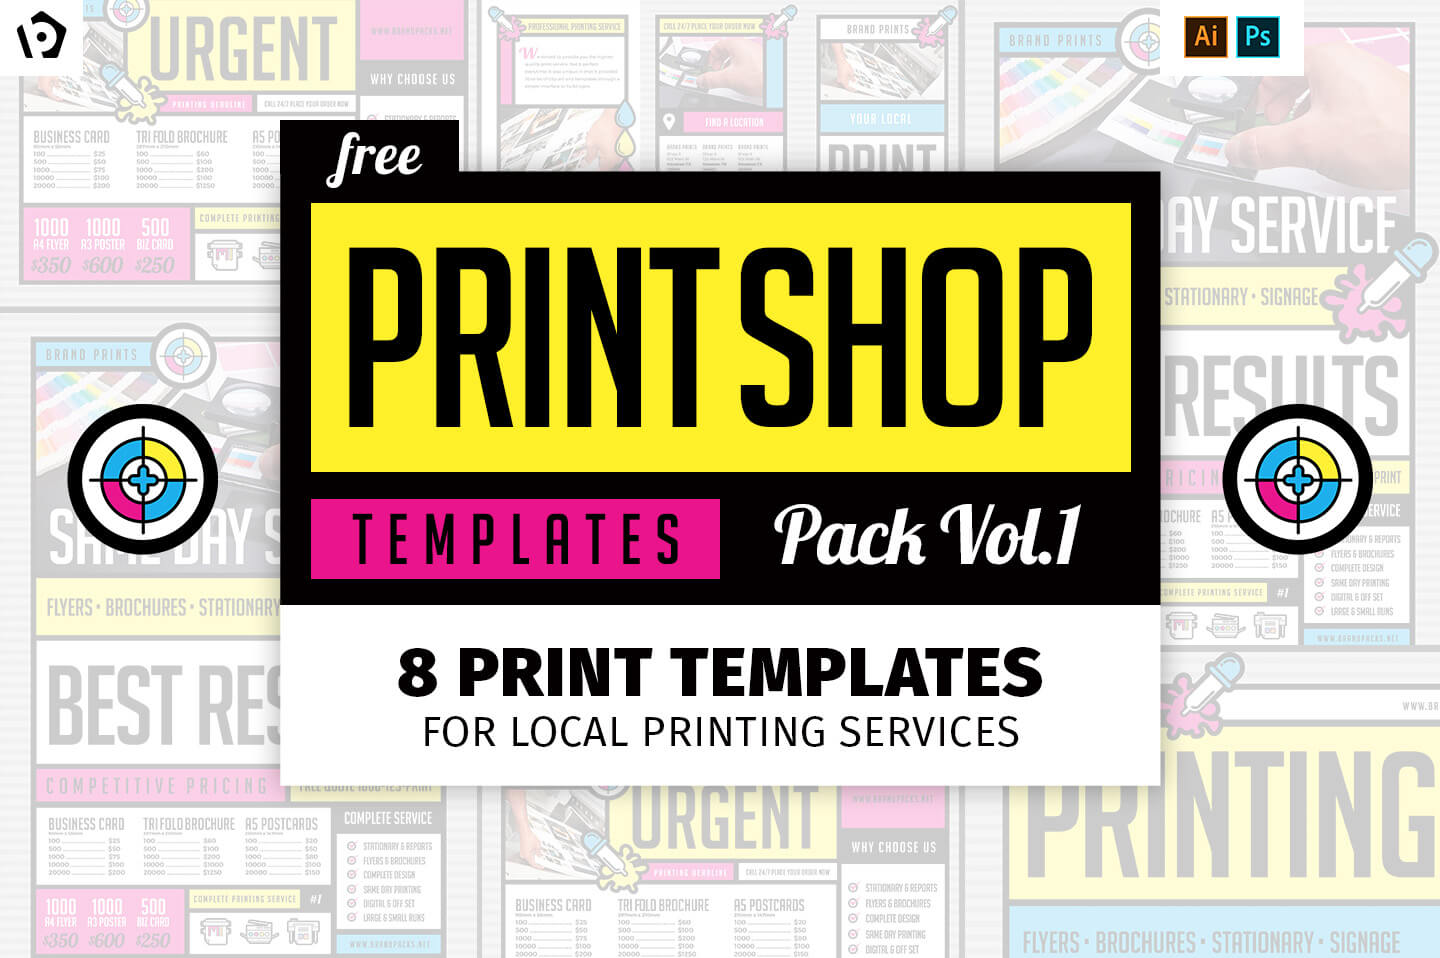 Free Print Shop Templates For Local Printing Services In Free Templates For Cards Print